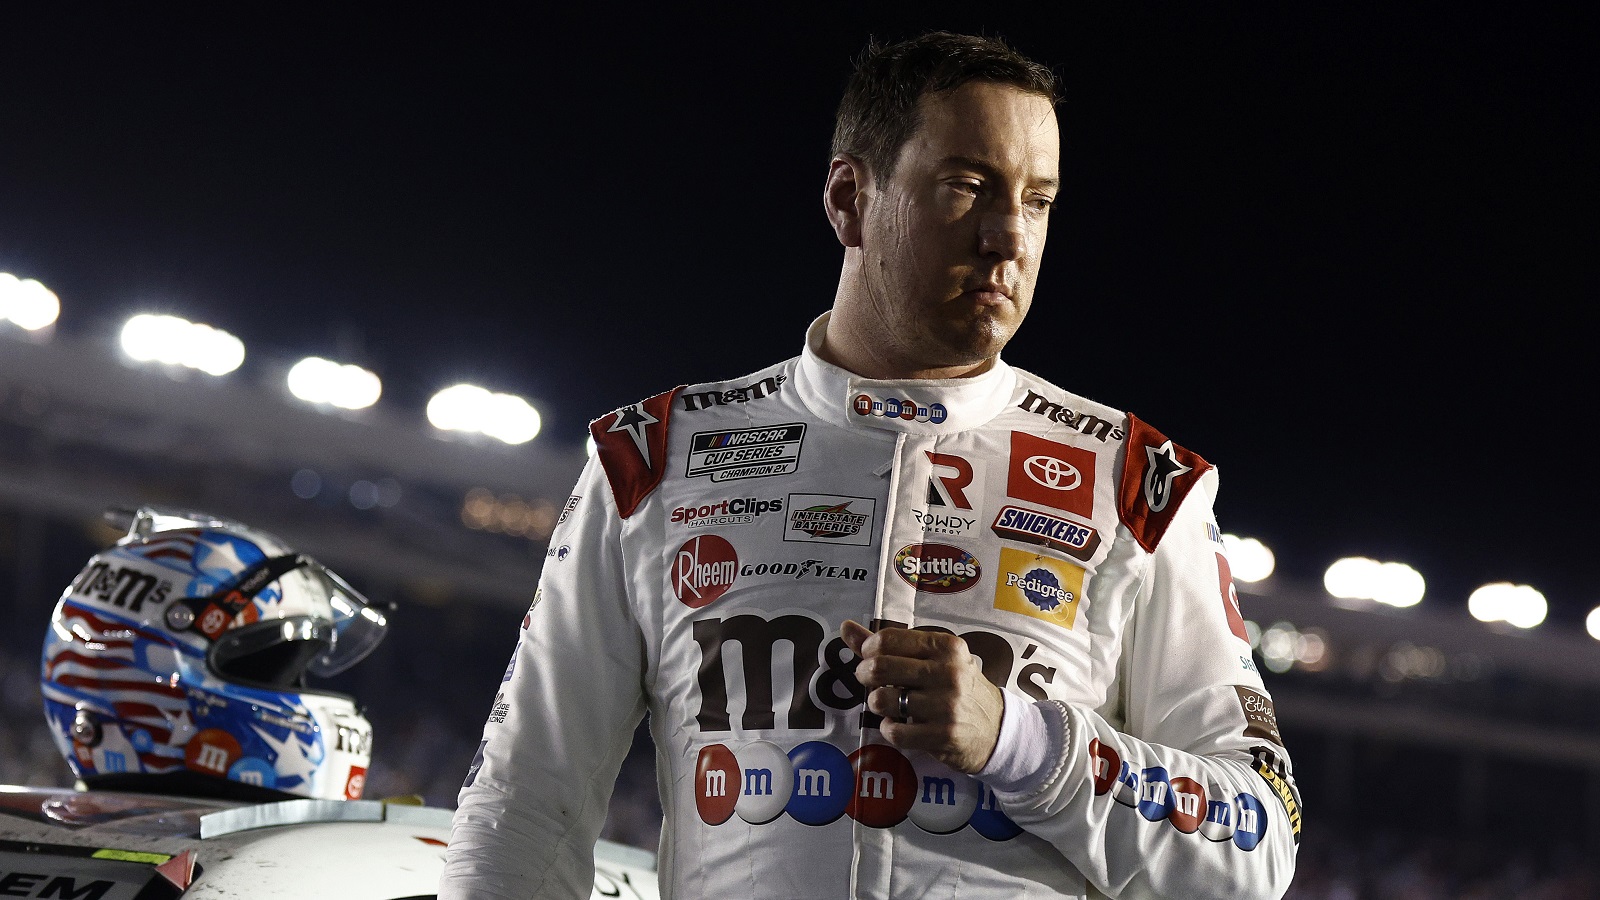 Kyle Busch, driver of the No. 18 Toyoya, exits his car after the NASCAR Cup Series Coca-Cola 600 at Charlotte Motor Speedway on May 29, 2022.